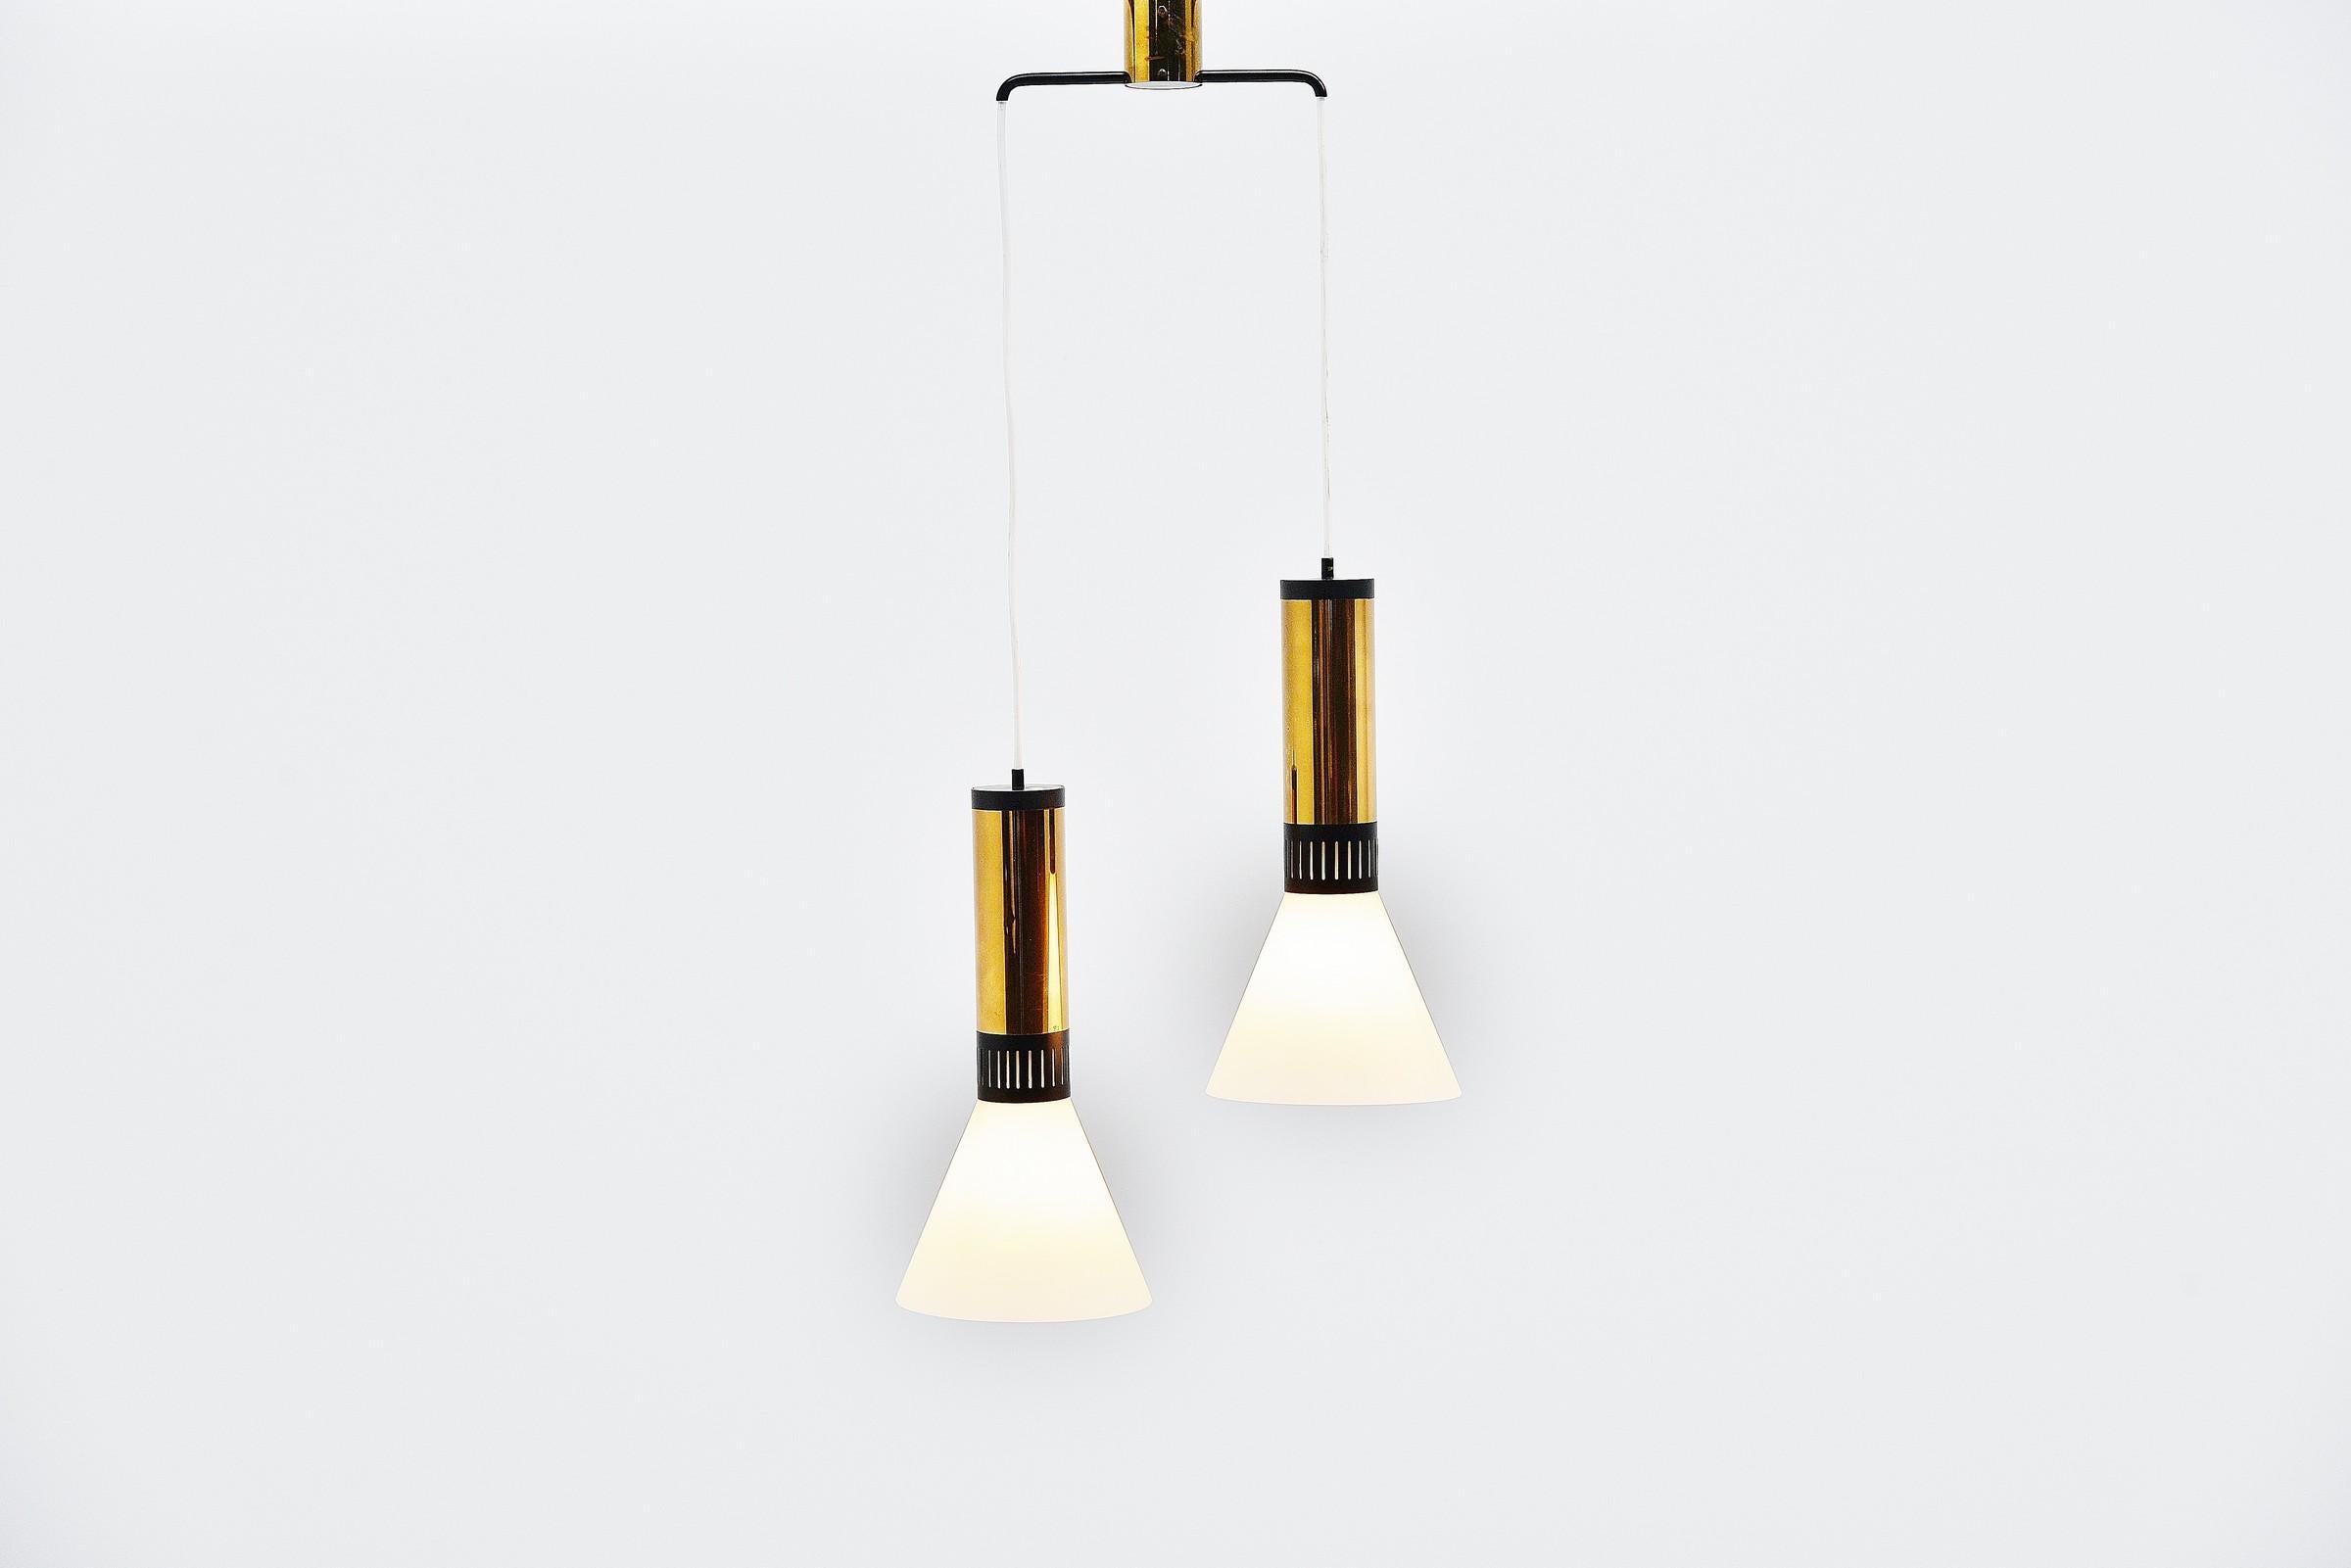 Very nice double pendant lamp model 1135 with nice shaped ceiling fitting for 2 pendants, designed and manufactured by Stilnovo, Italy 1960. This lamp has fittings made of brass and black painted metal tubes, with die cut strip pattern for a nice